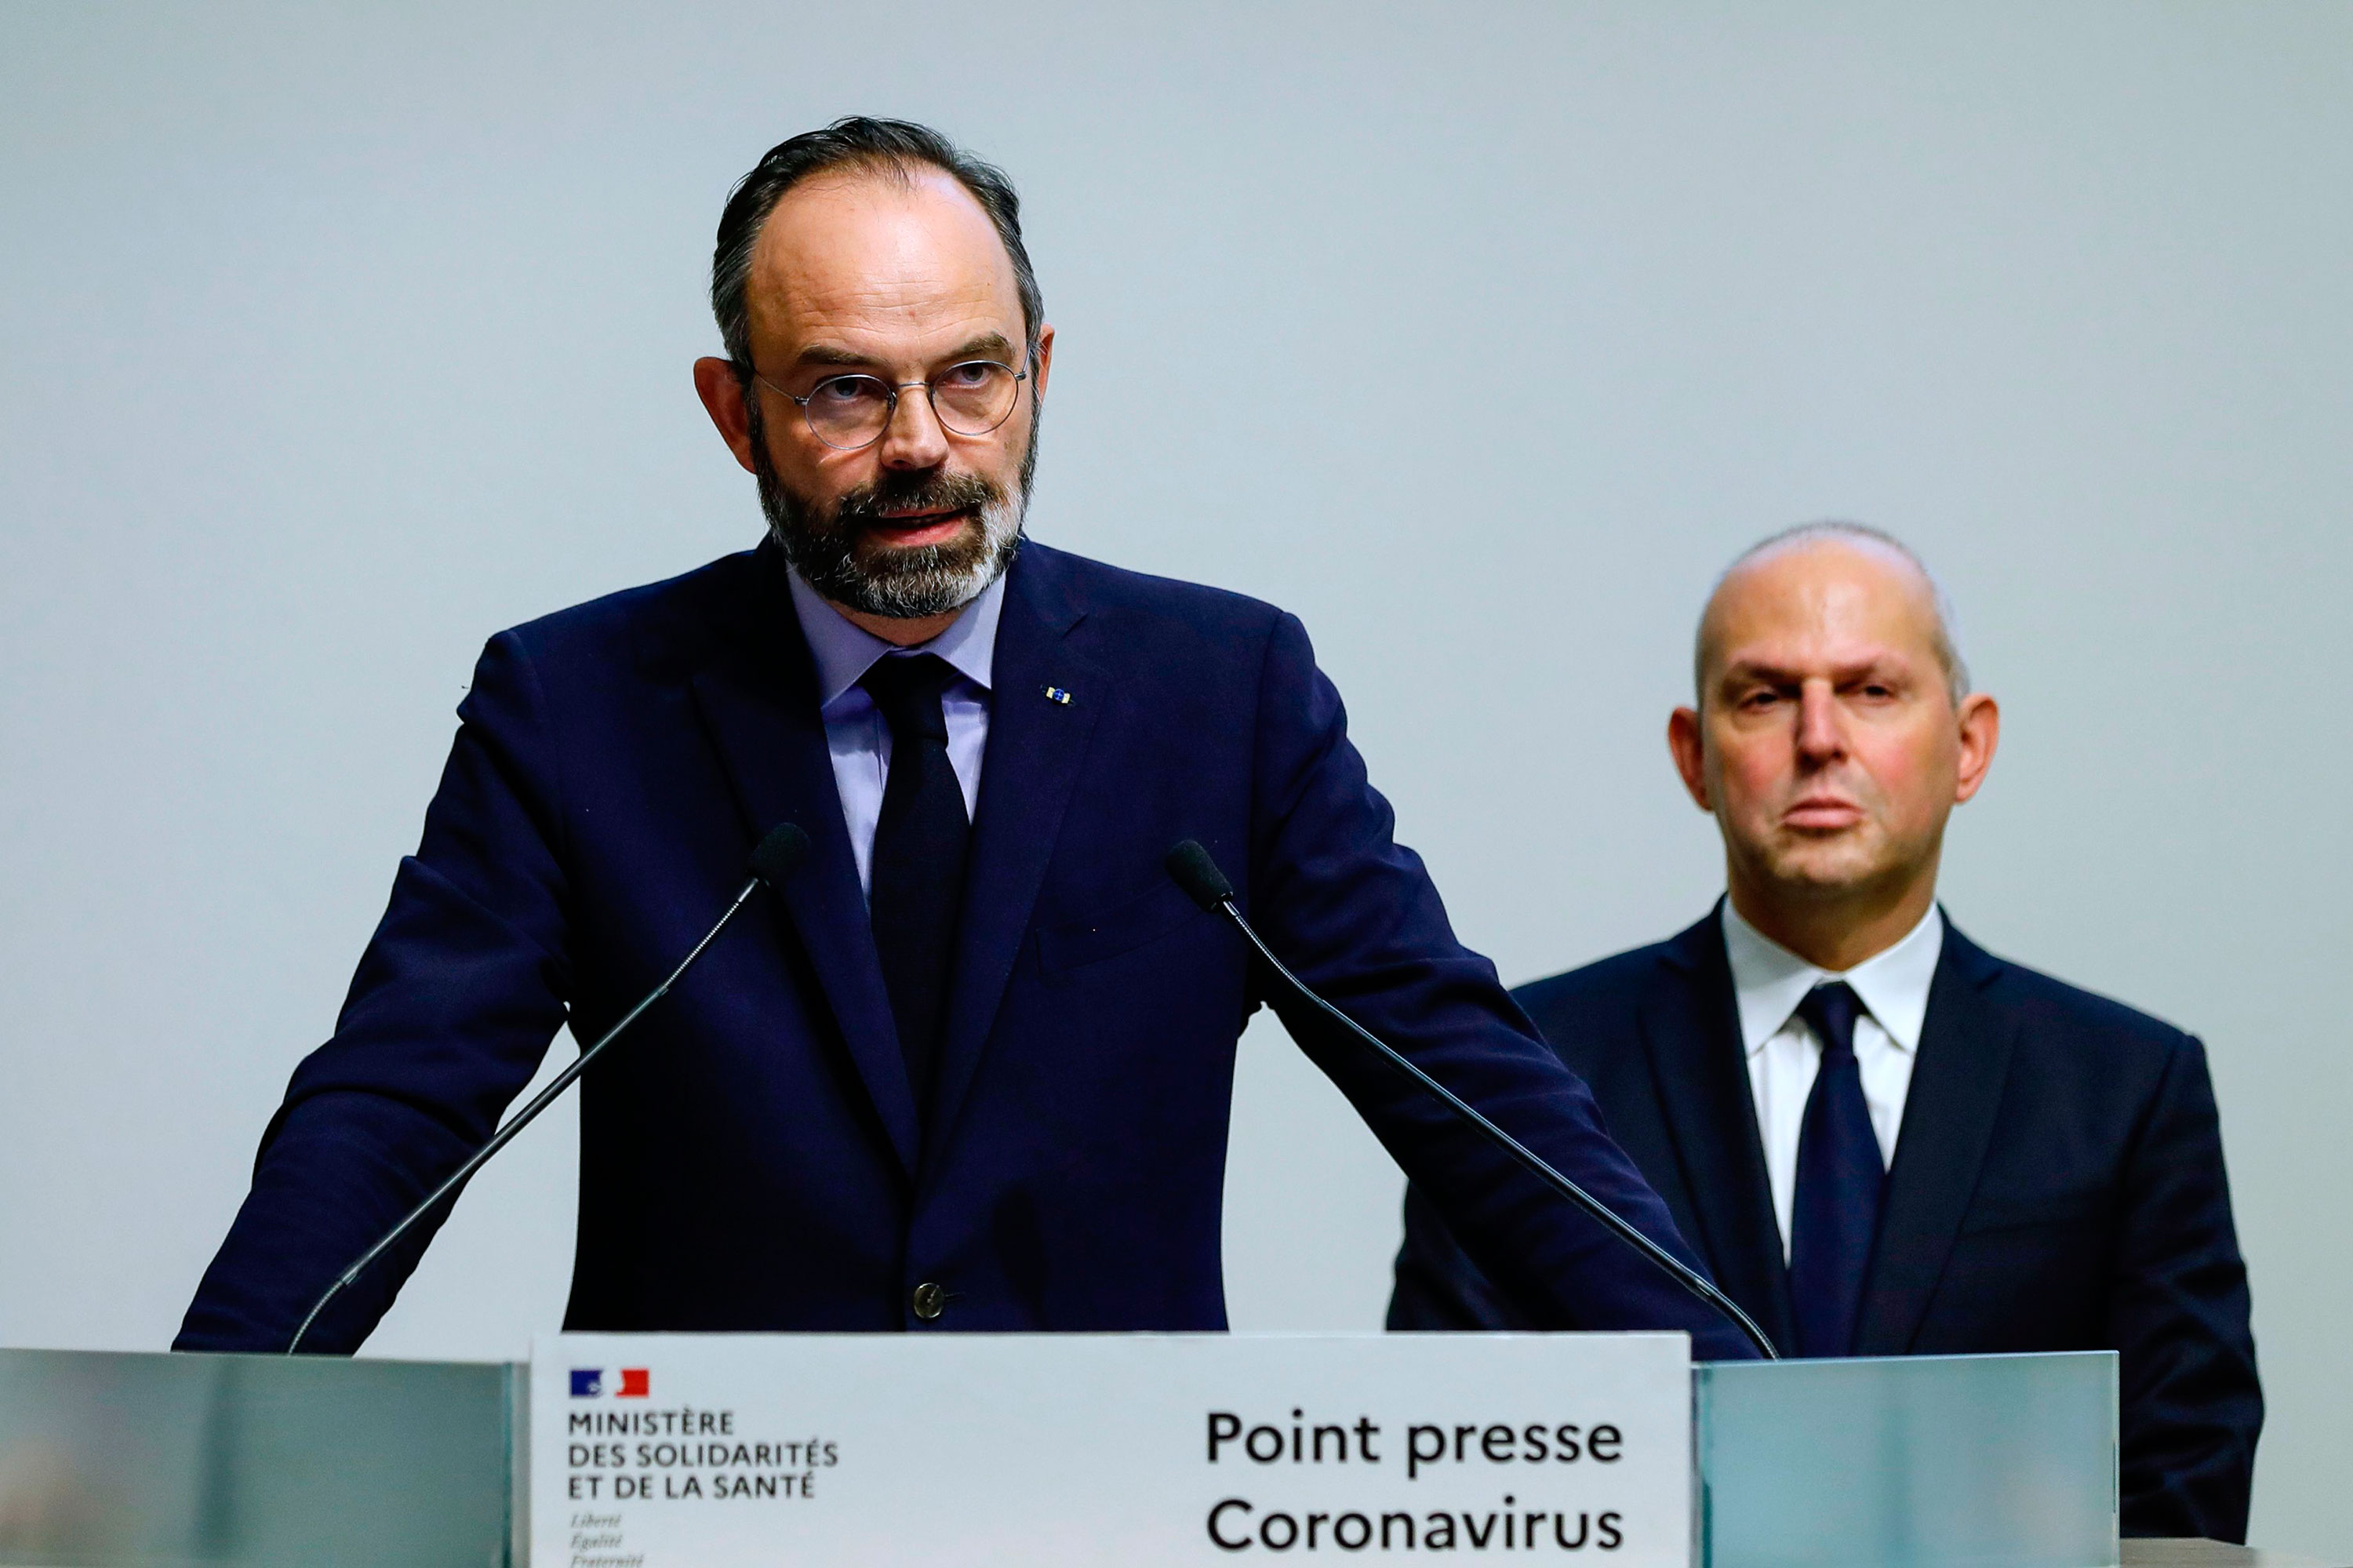 French Prime Minister Édouard Philippe announces new measures to limit the spread of coronavirus on March 14 in Paris.